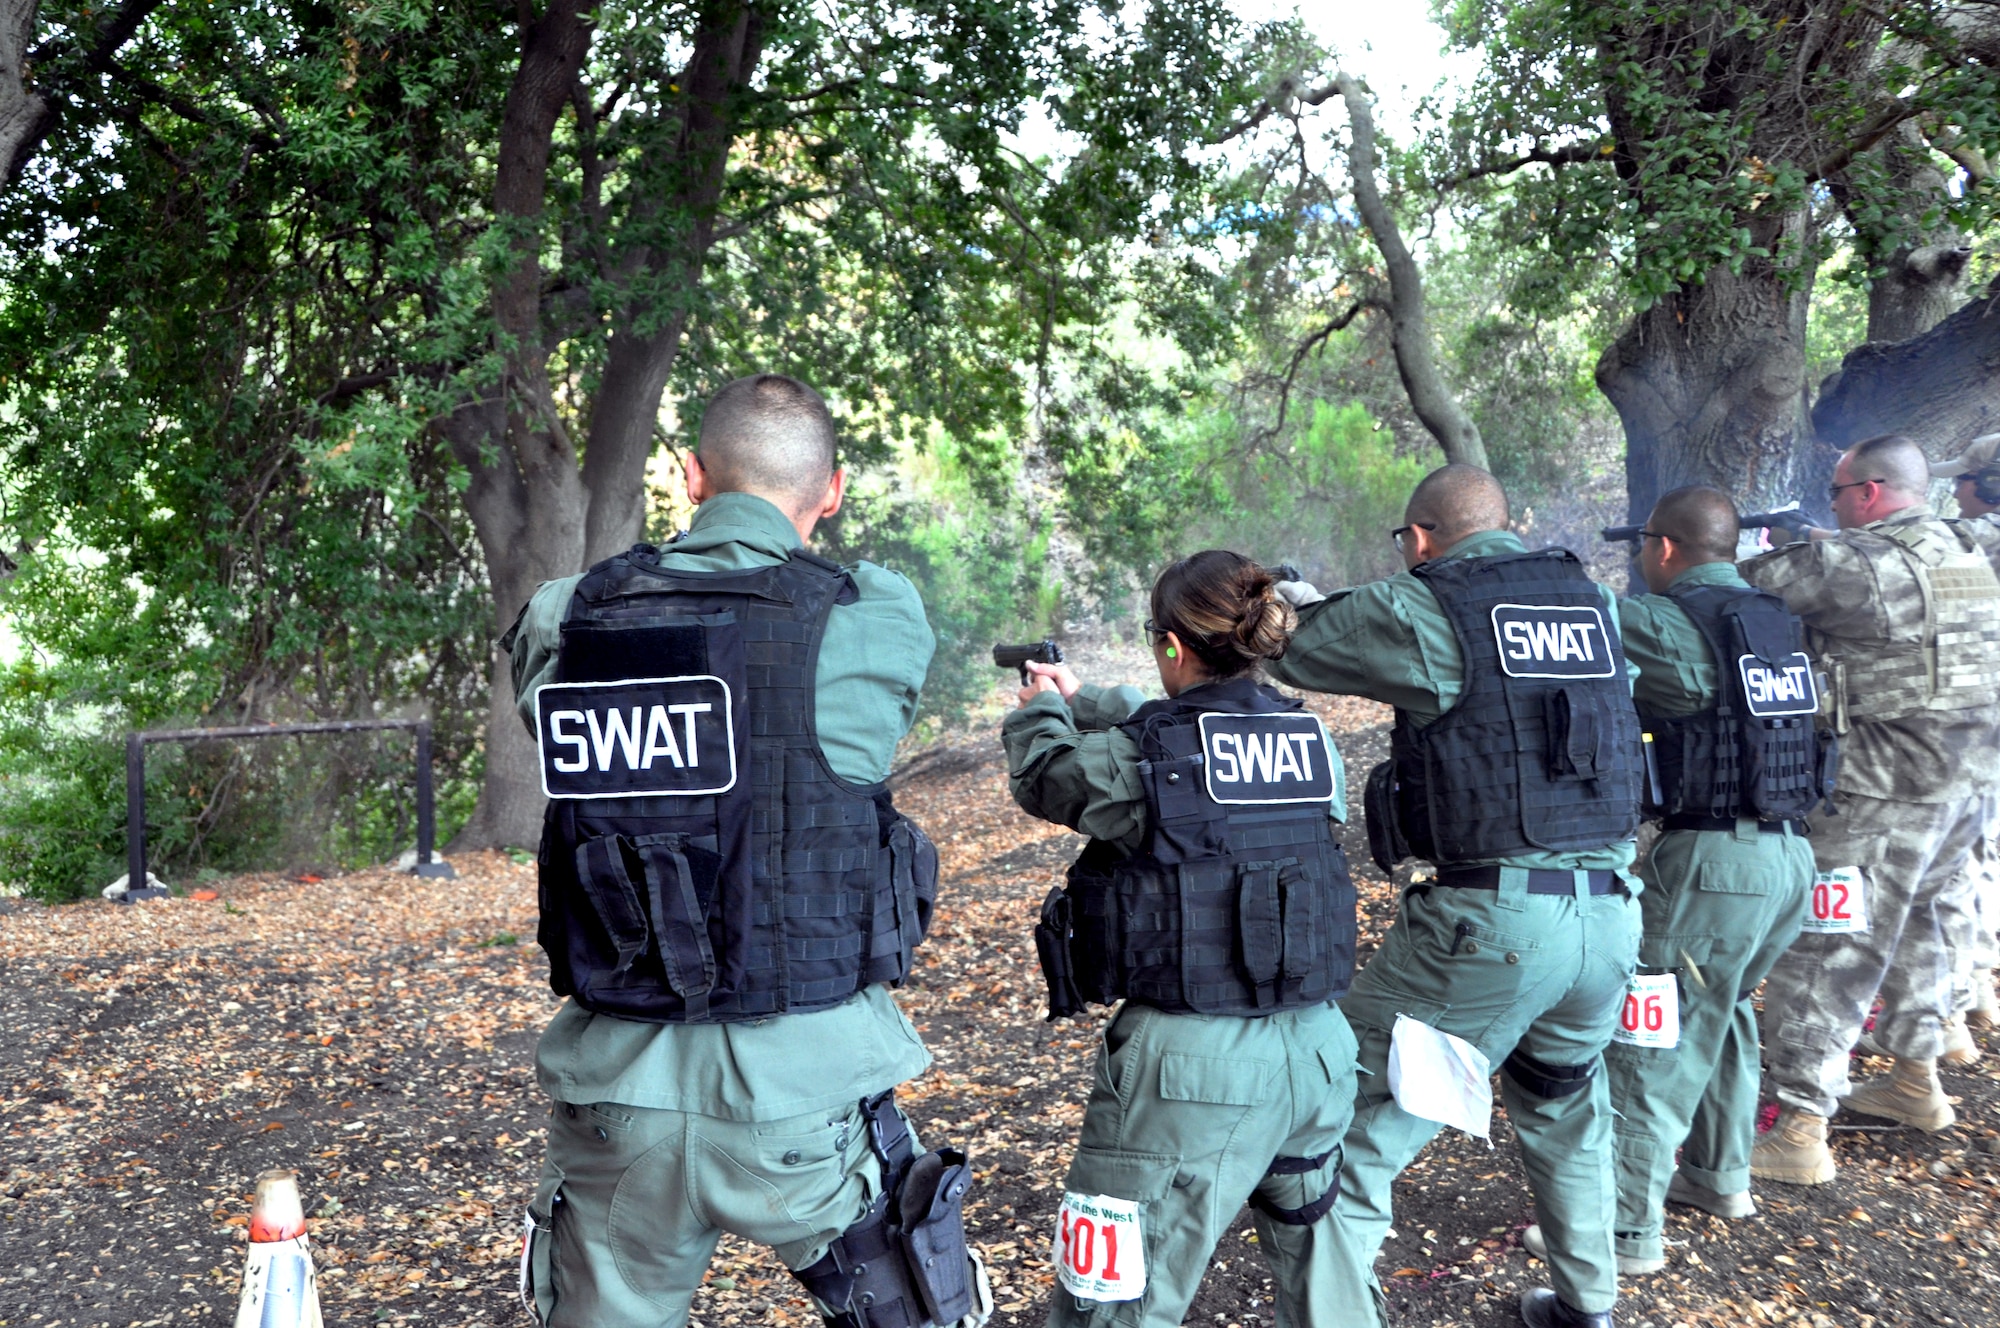 Members of the Travis Emergency Services Team fire at targets in the Jungle Trail course last week in San Jose. The Airmen were competing in the Best in the West SWAT competition against 35 other SWAT teams from the West Coast.(U.S. Air Force photo/Staff Sgt. Patrick Harrower)